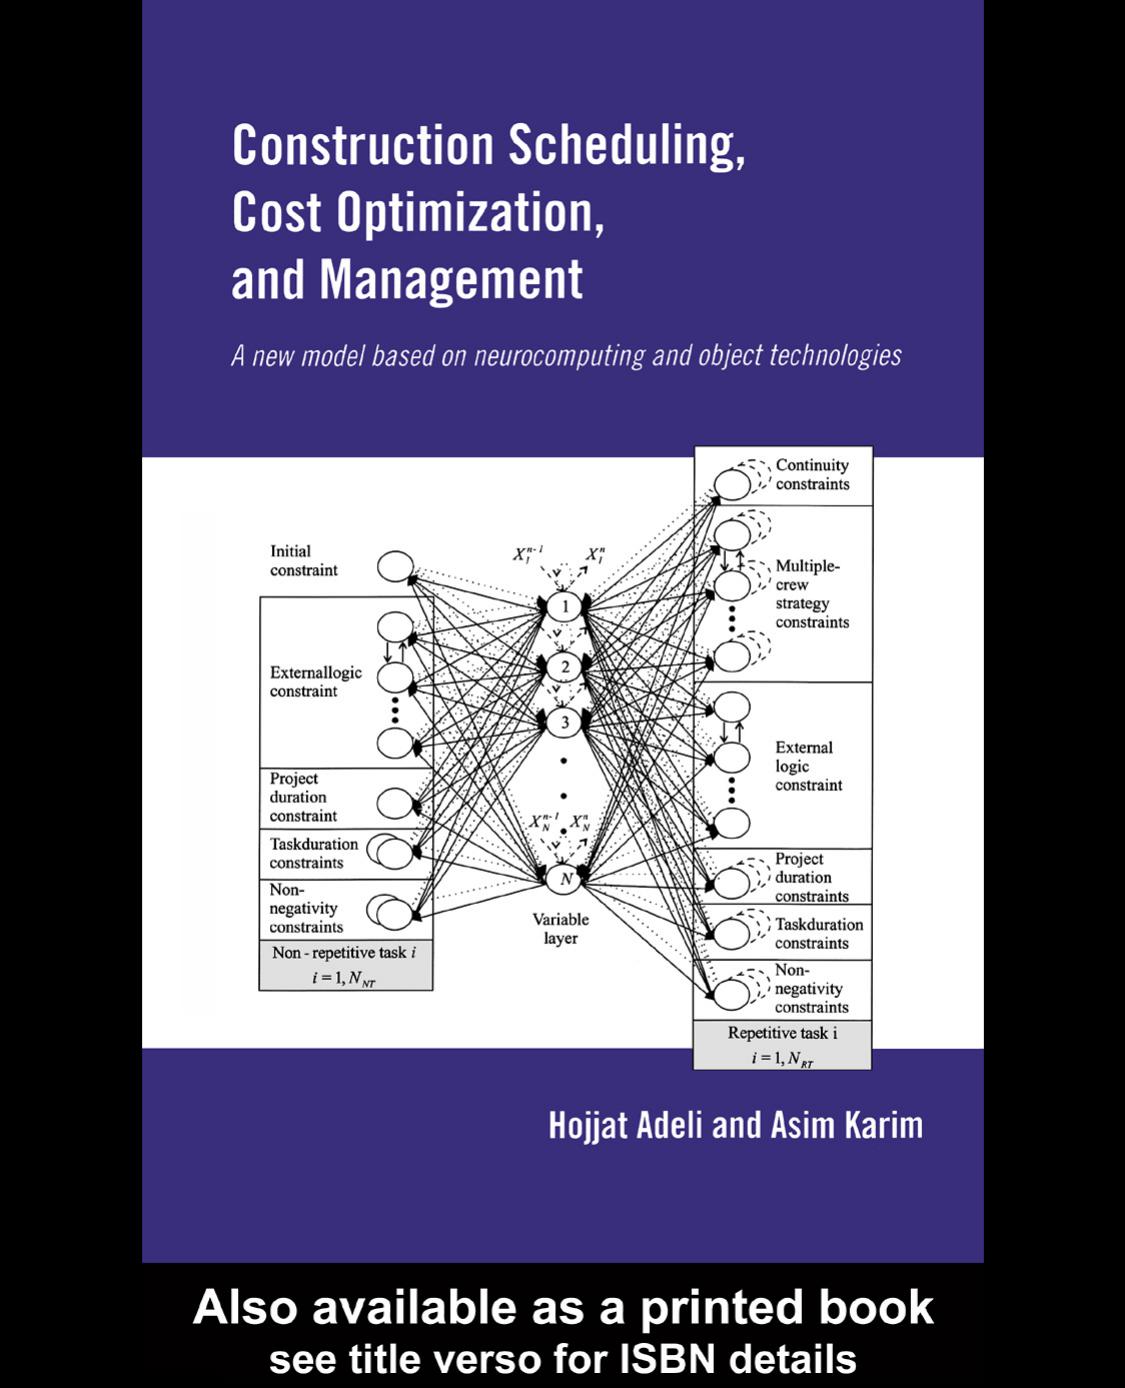 Construction Scheduling, Cost Optimization, and Management: A New Model Based on Neurocomputing and Object Technologies